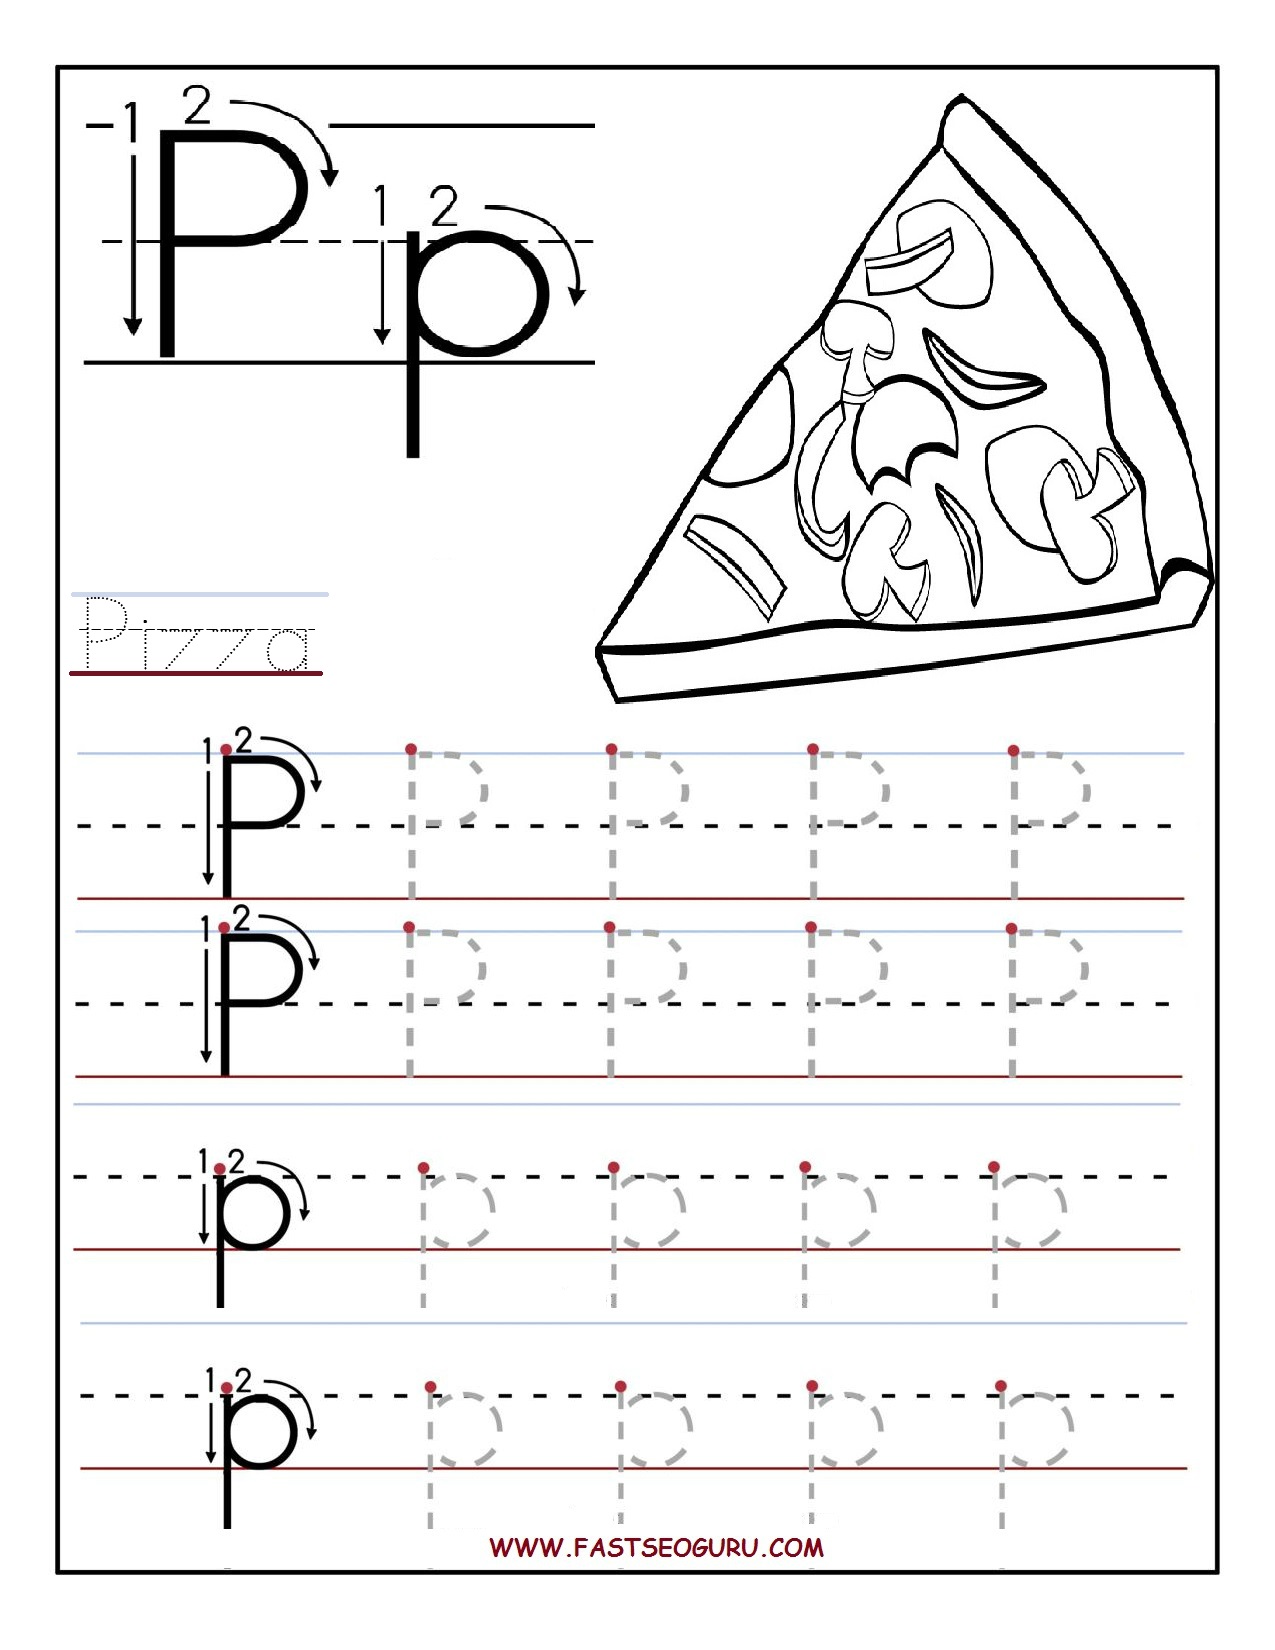 printable-letter-p-tracing-worksheets-for-preschool-b31